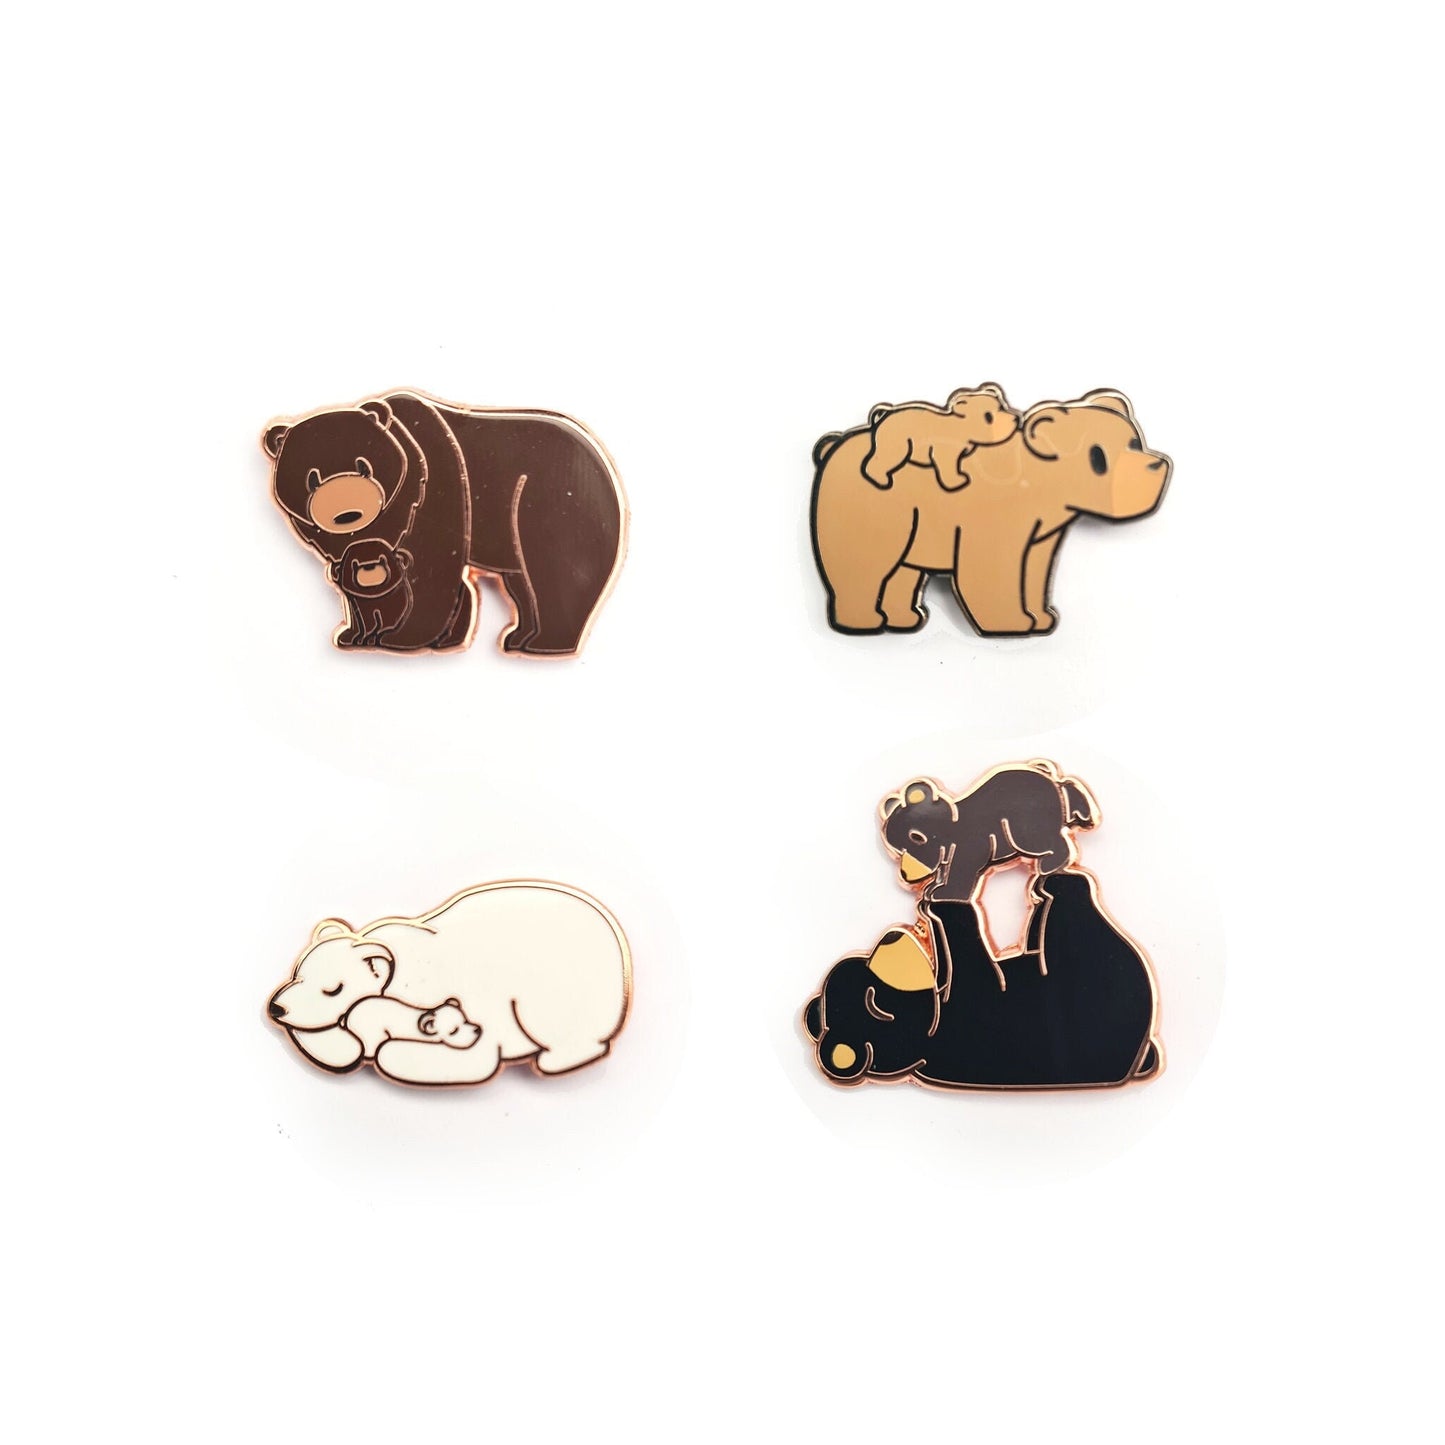 Mama Bear and Baby Bear, Piggy Back Ride - Small Enamel Pin, Mother’s Day Gift, Pins, Brooches & Lapel Pins